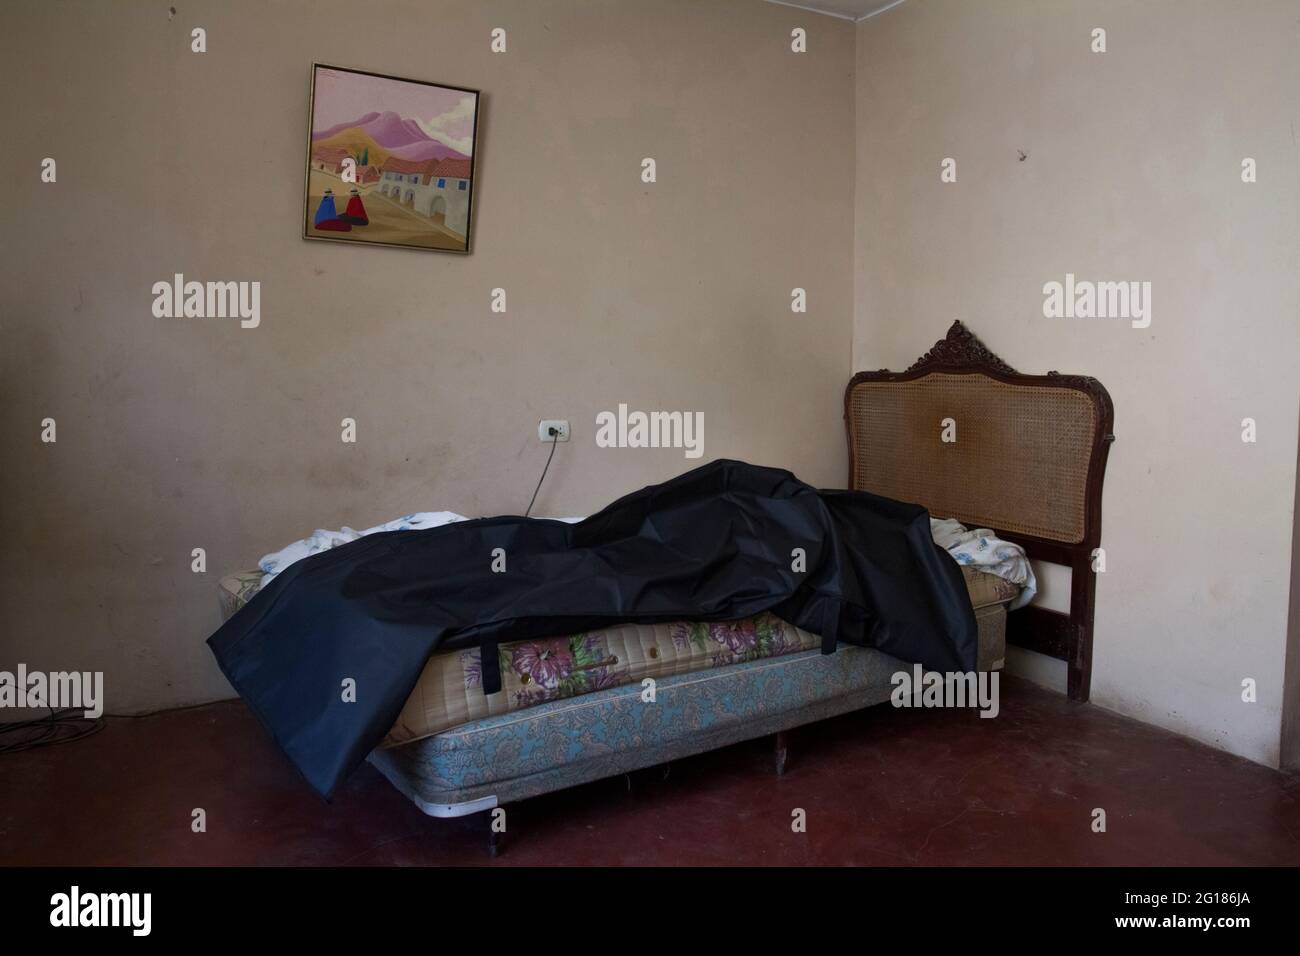 At the bedroom of María Jiménez Amado (65) there is a portrait of an Andean landscape that commands the empty walls. Beneath its flashy colors lays a black plastic bag containing her body. During 2021, 11% of all covid-19 deaths in Lima (Perú) occurred at home. According to the Peruvian government 185,380.00 people have died due to the coronavirus across the country. Peru. Stock Photo